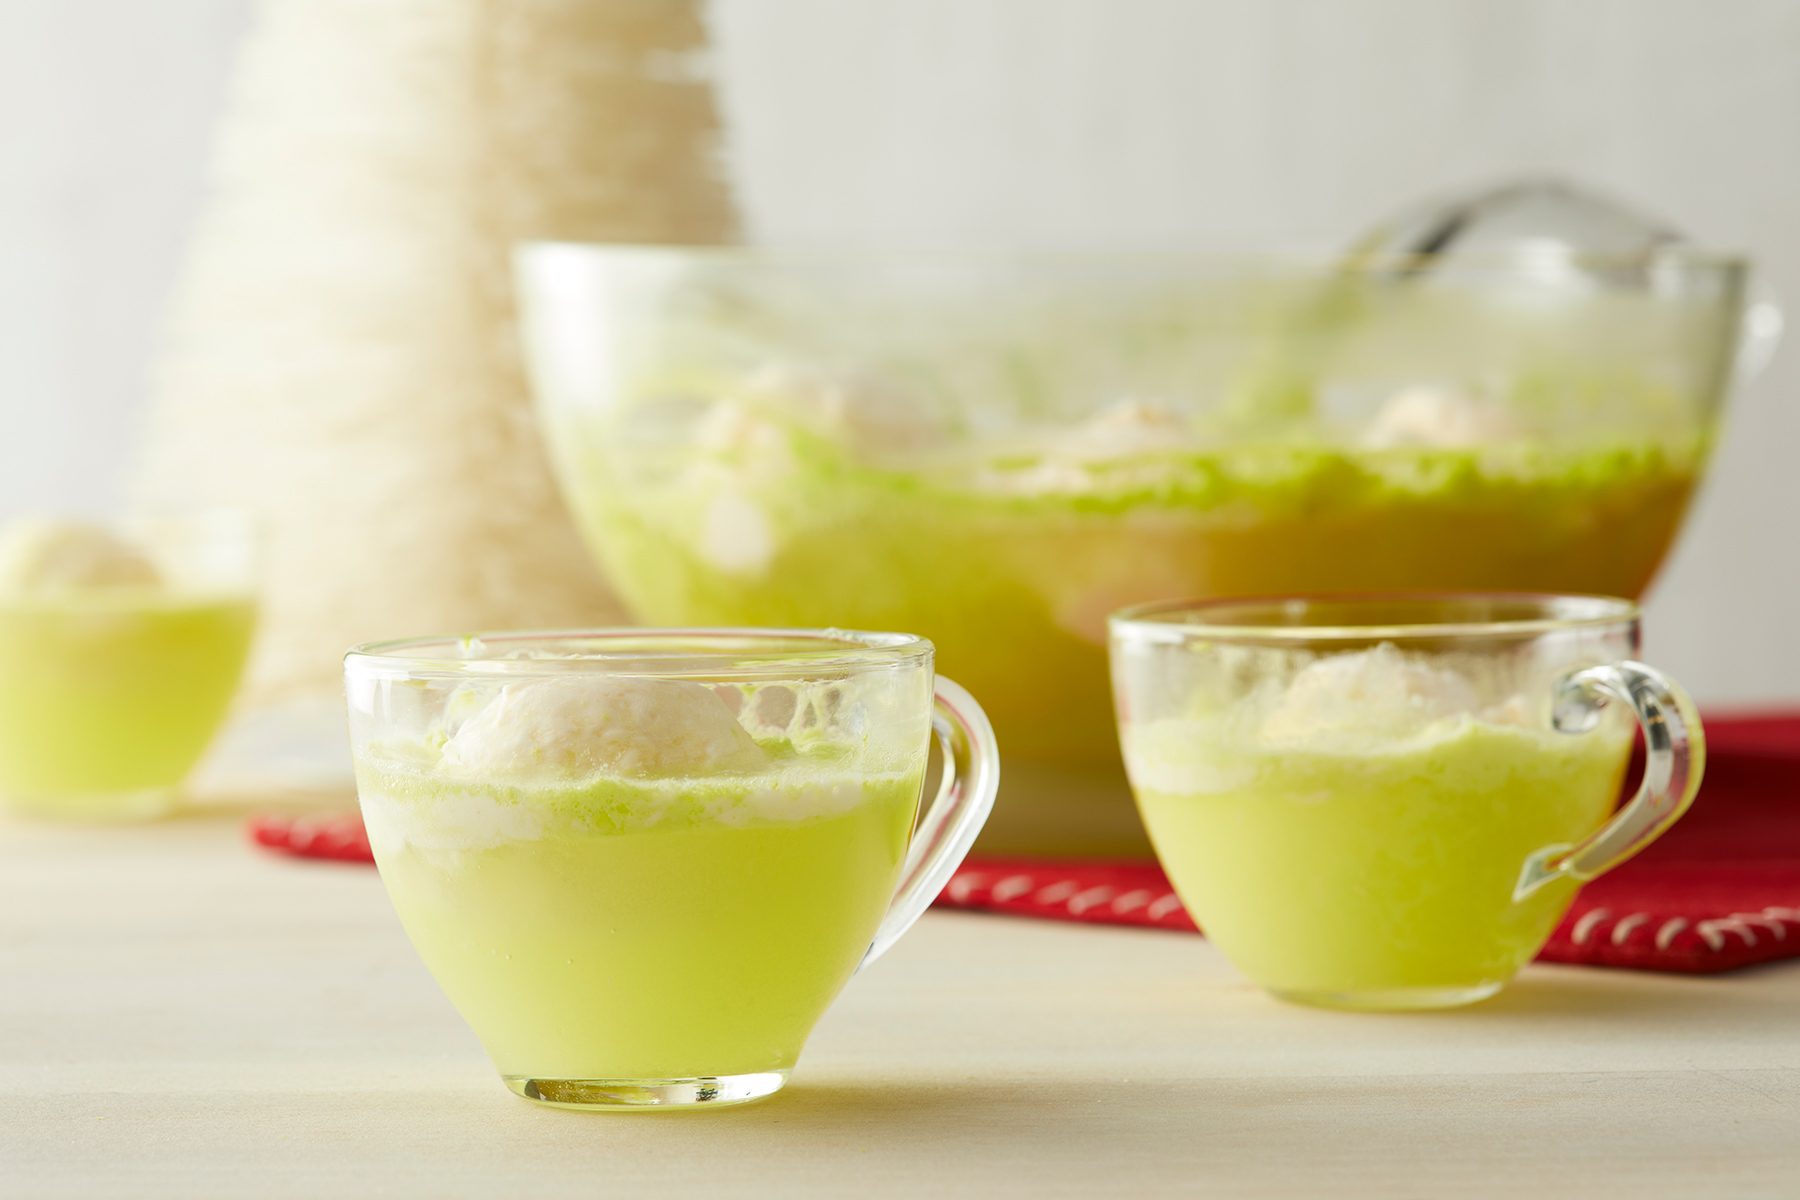 Bright green sherbet punch in clear glass cups with a punch bowl in the background. Each cup contains a scoop of vanilla ice cream floating on top. A red cloth adds a pop of color underneath the punch bowl, with a blurred white object in the background.